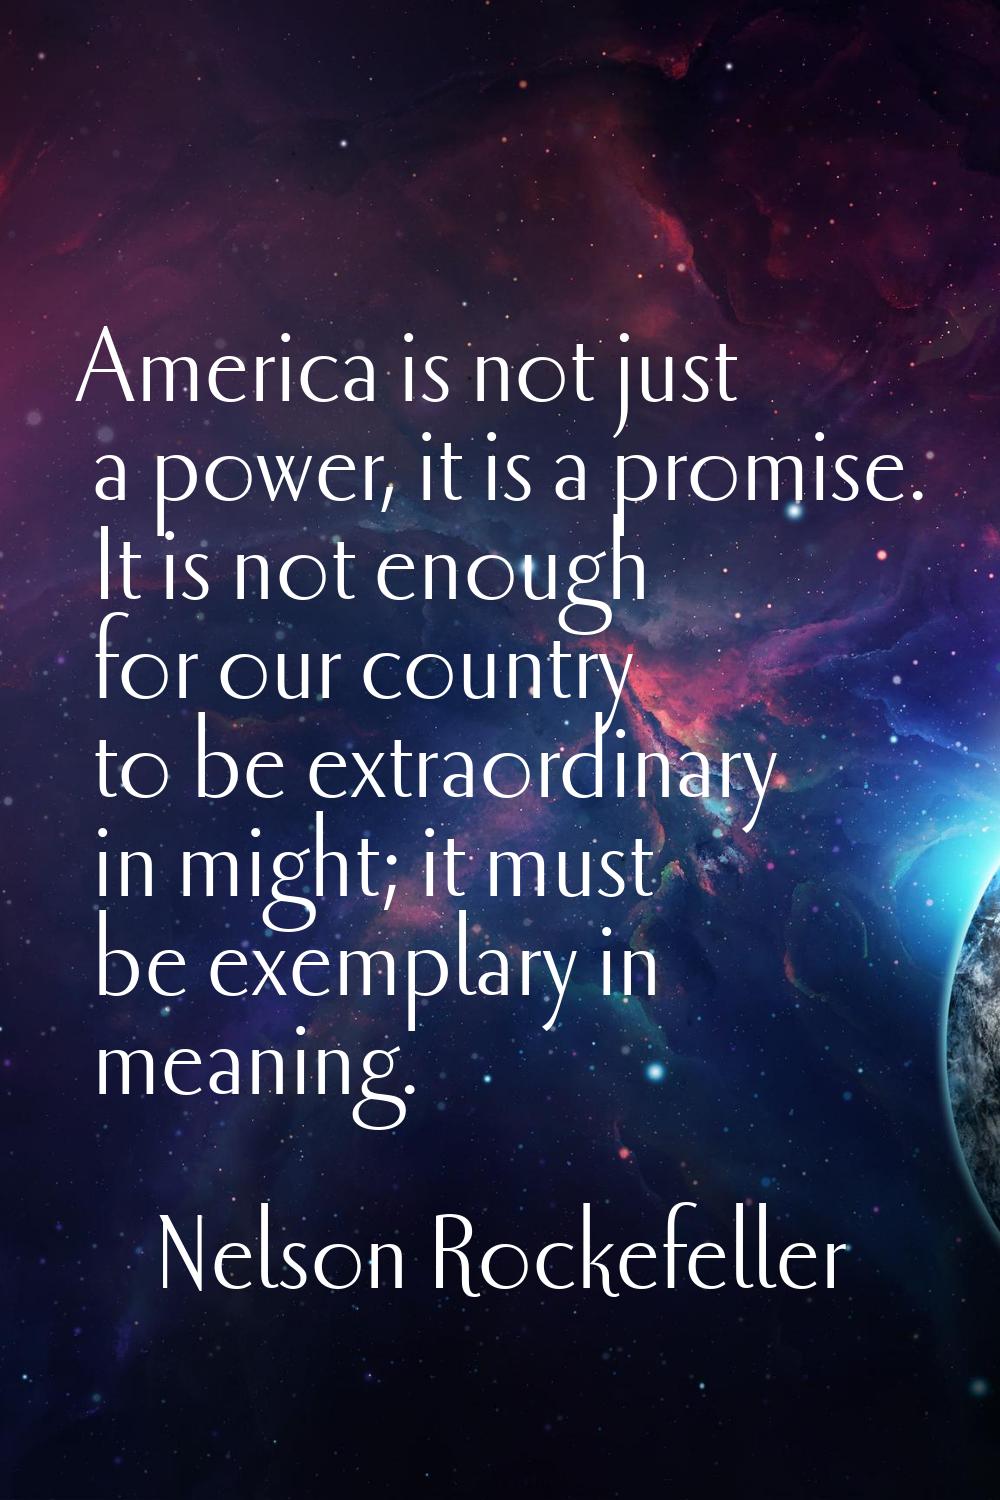 America is not just a power, it is a promise. It is not enough for our country to be extraordinary 